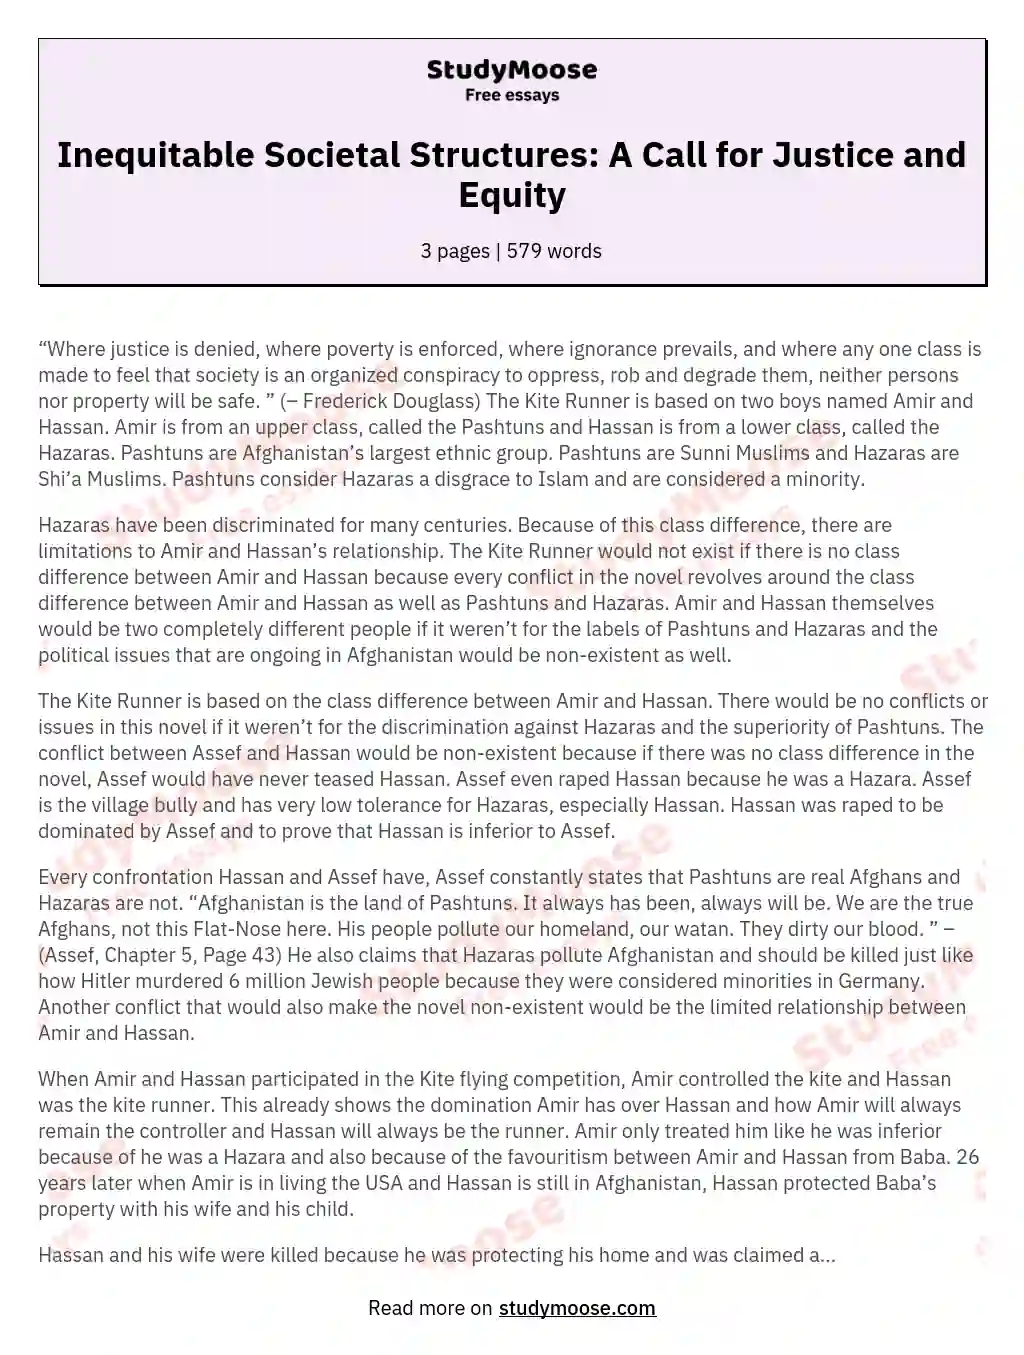 Inequitable Societal Structures: A Call for Justice and Equity essay